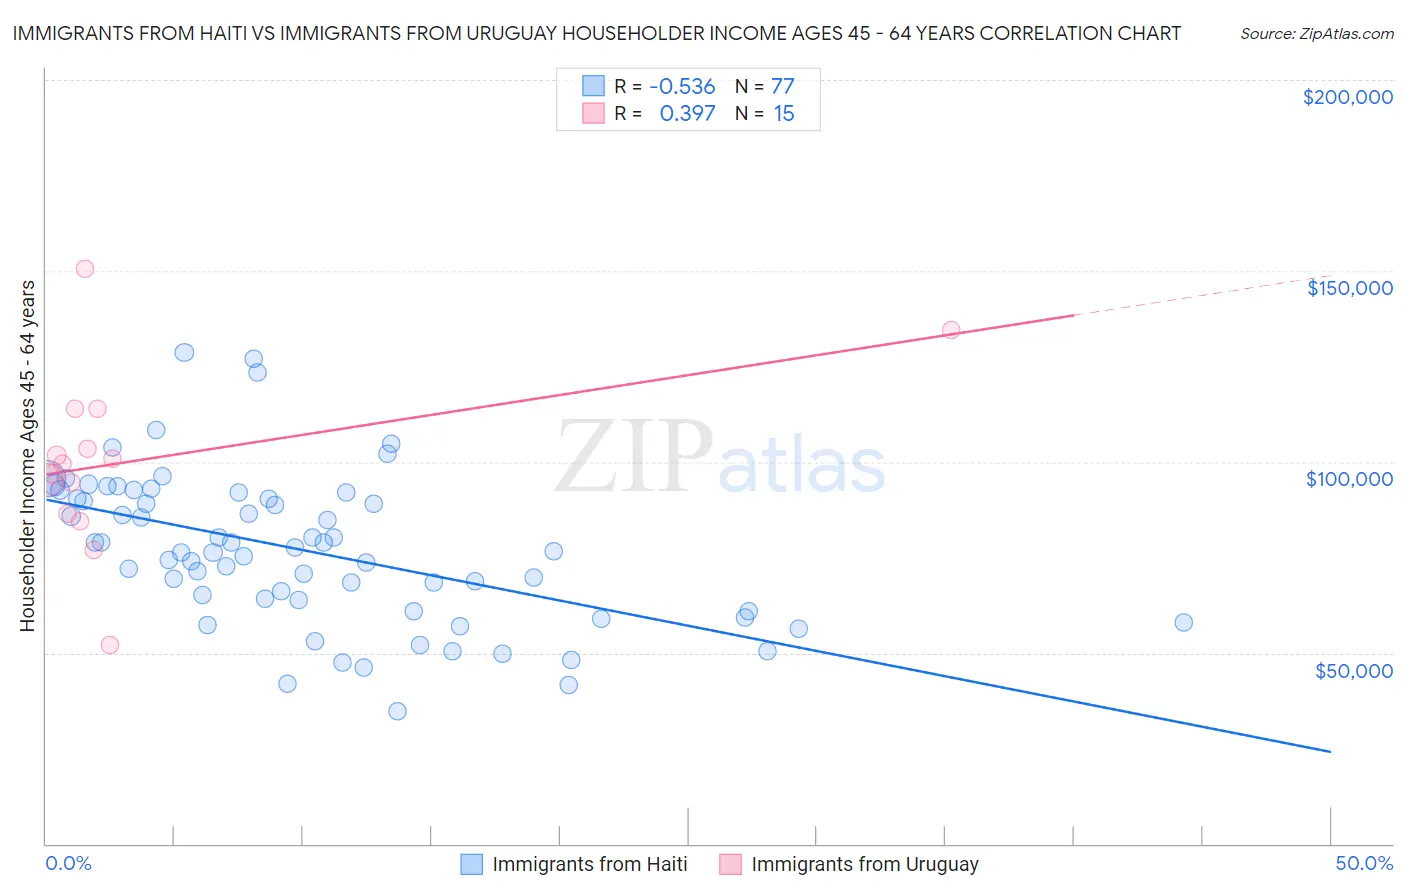 Immigrants from Haiti vs Immigrants from Uruguay Householder Income Ages 45 - 64 years